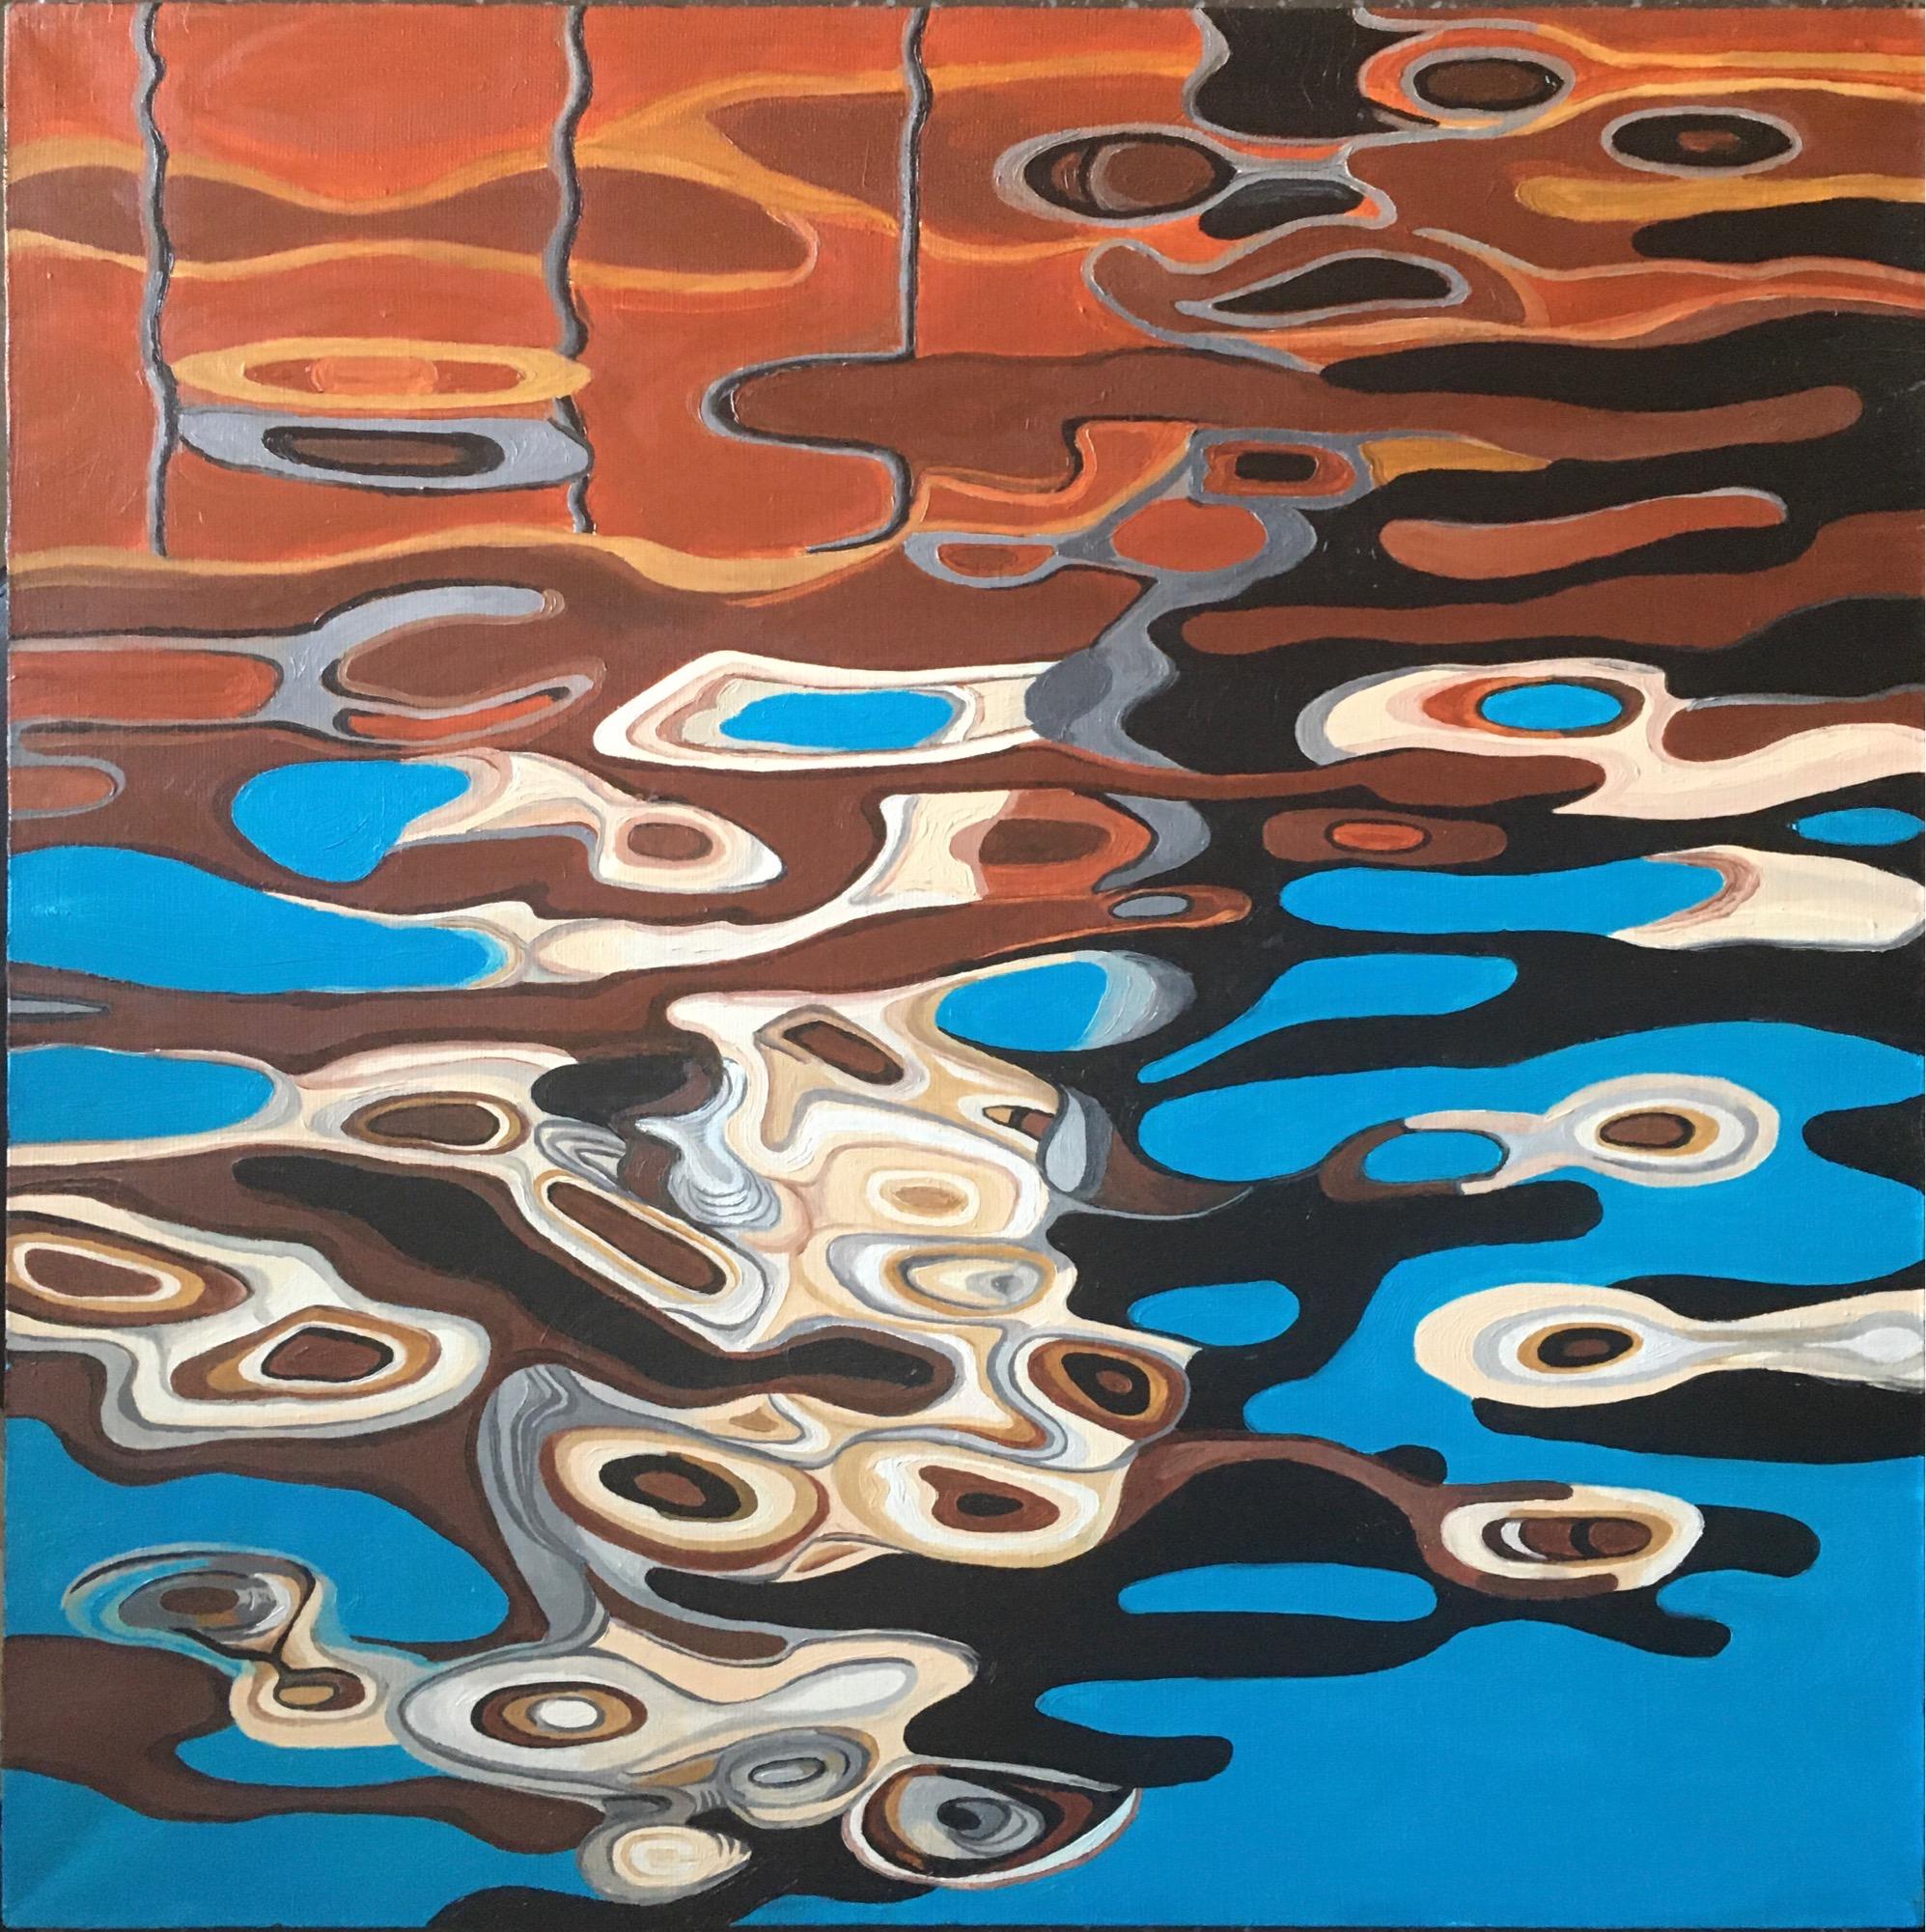 Reflection-abstract painting, made in blue, brown, beige, orange, grey color